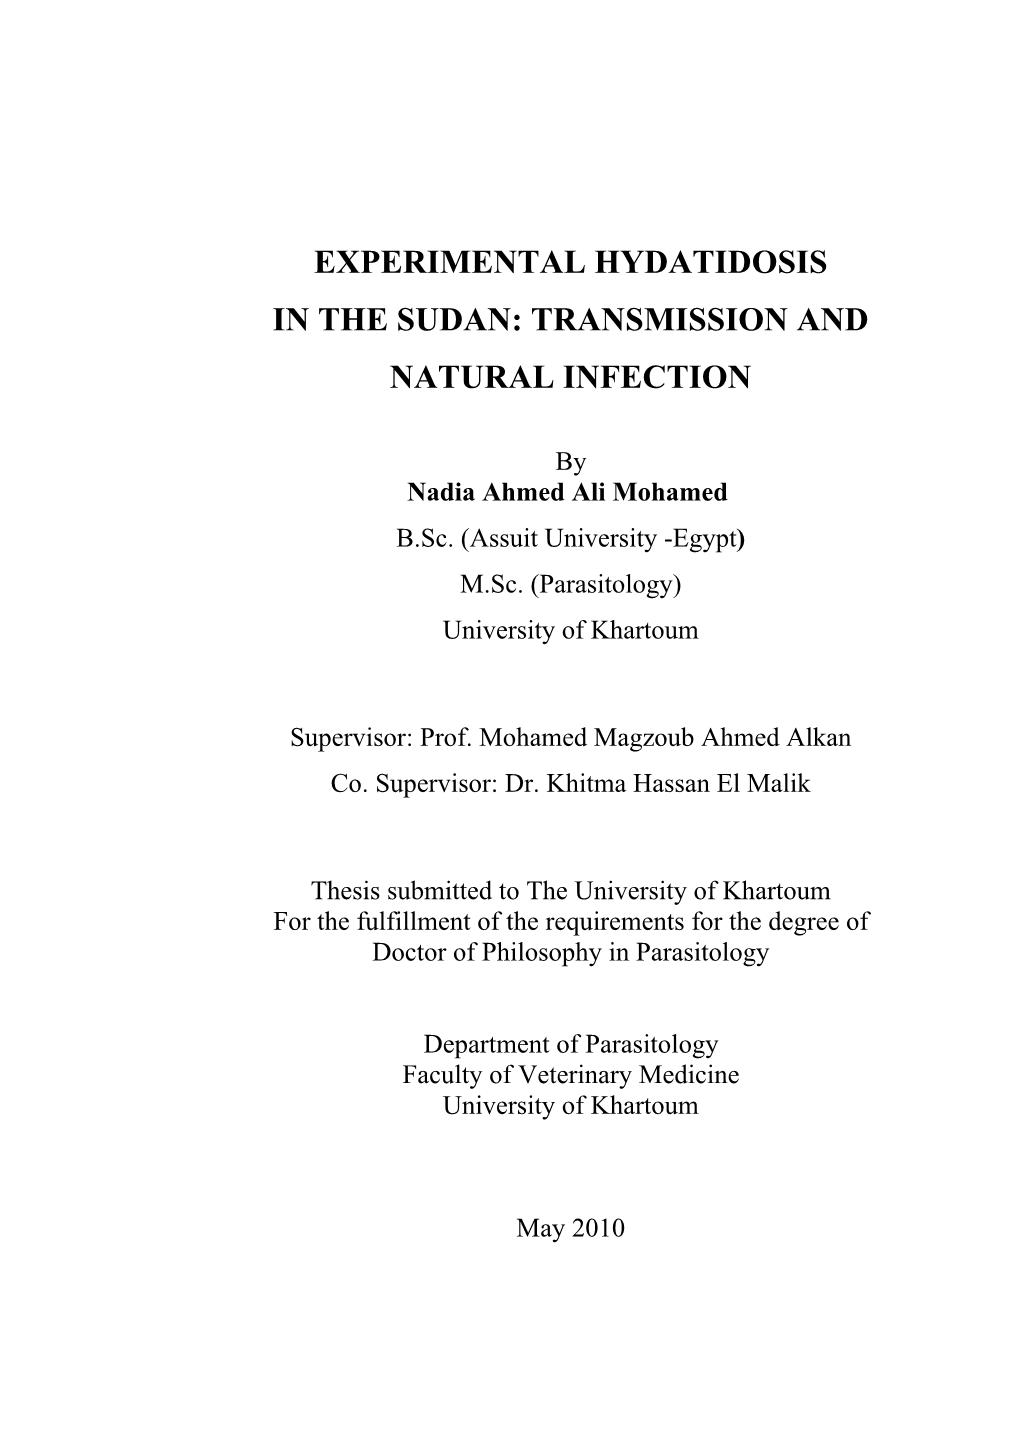 Experimental Hydatidosis in the Sudan: Transmission and Natural Infection